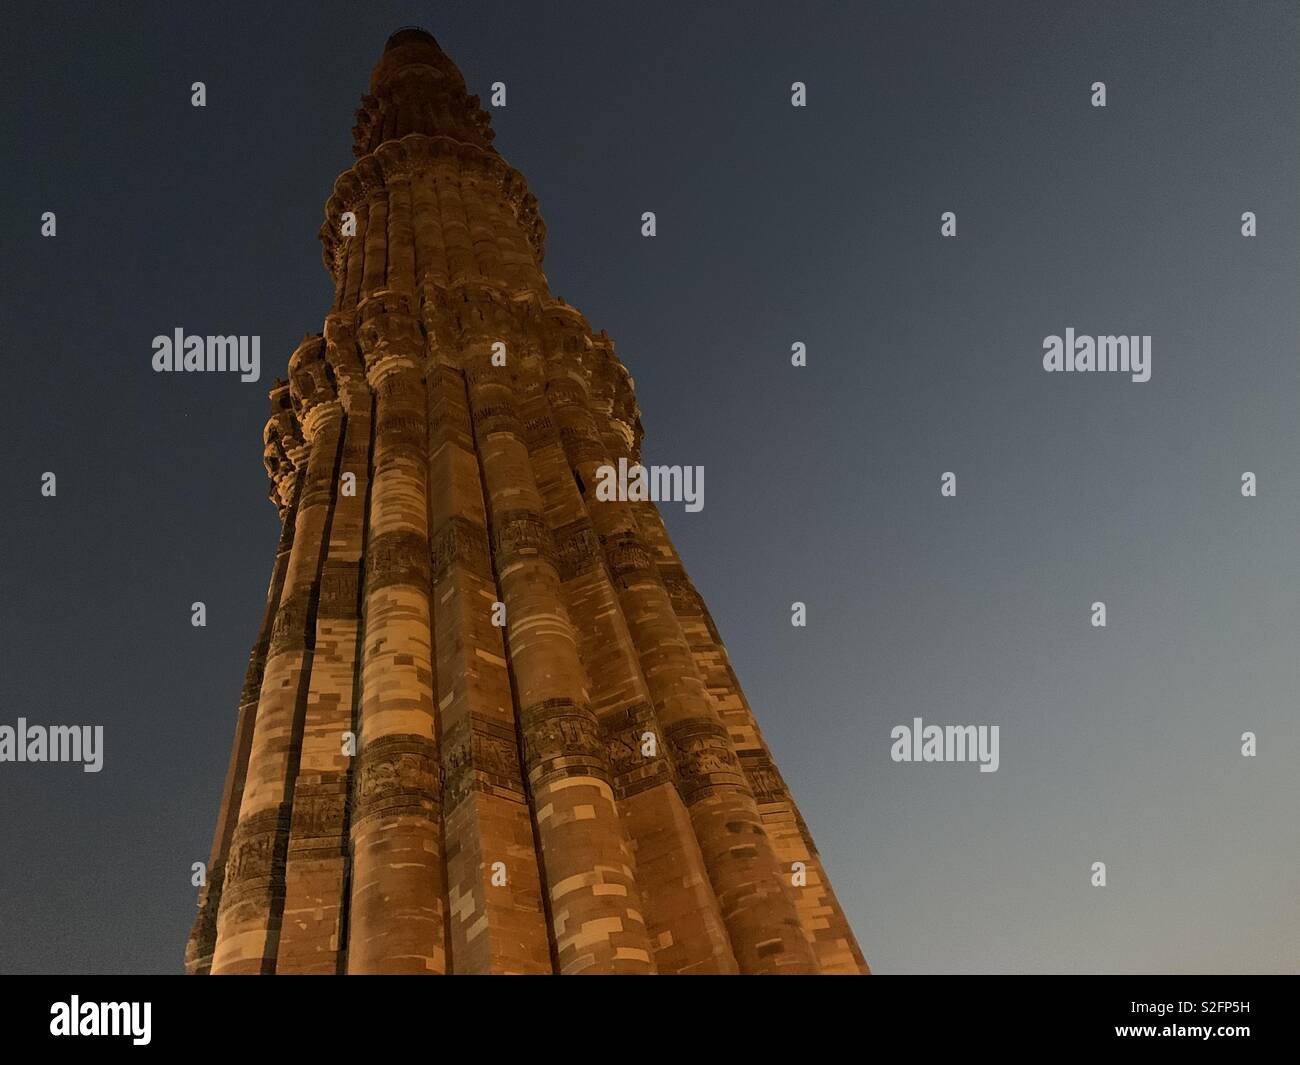 Nighttime view of the Qutab Minar in the Qutab complex in Delhi, India. Stock Photo